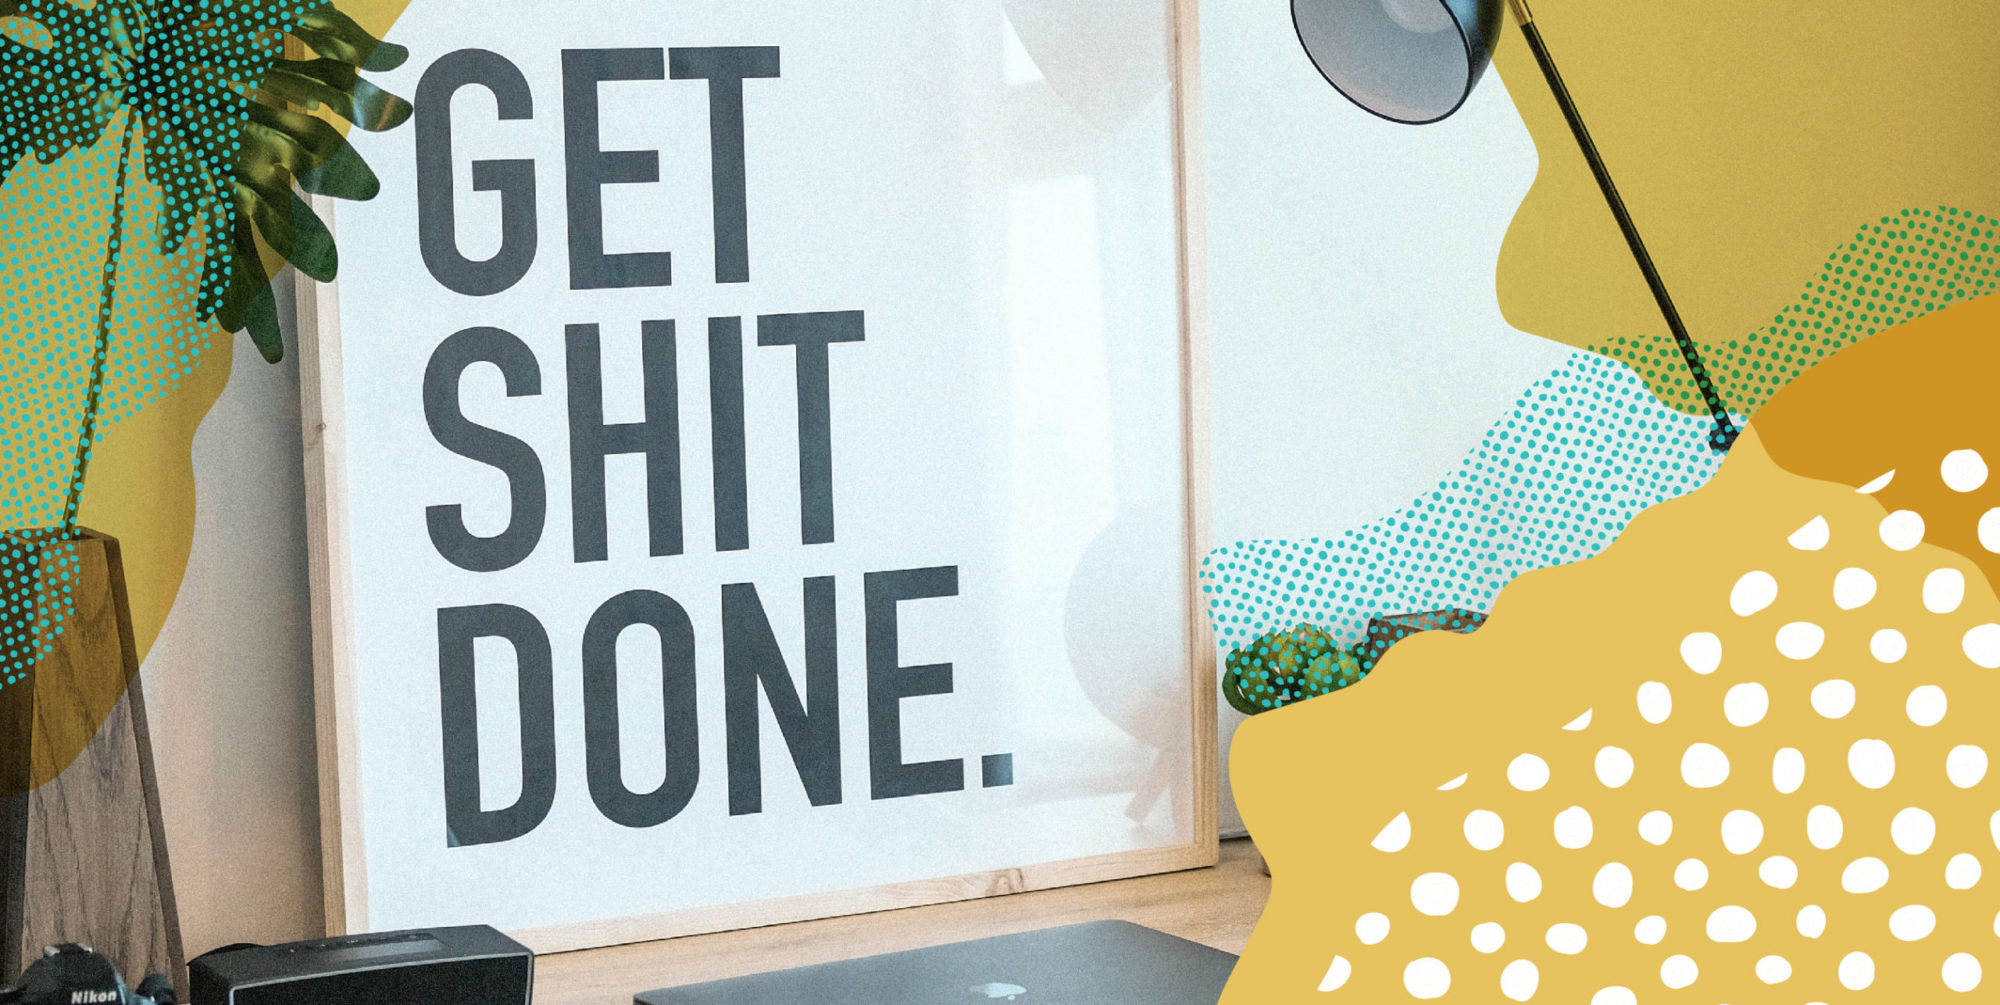 Framed photo on a desk that says, "Get shit done."